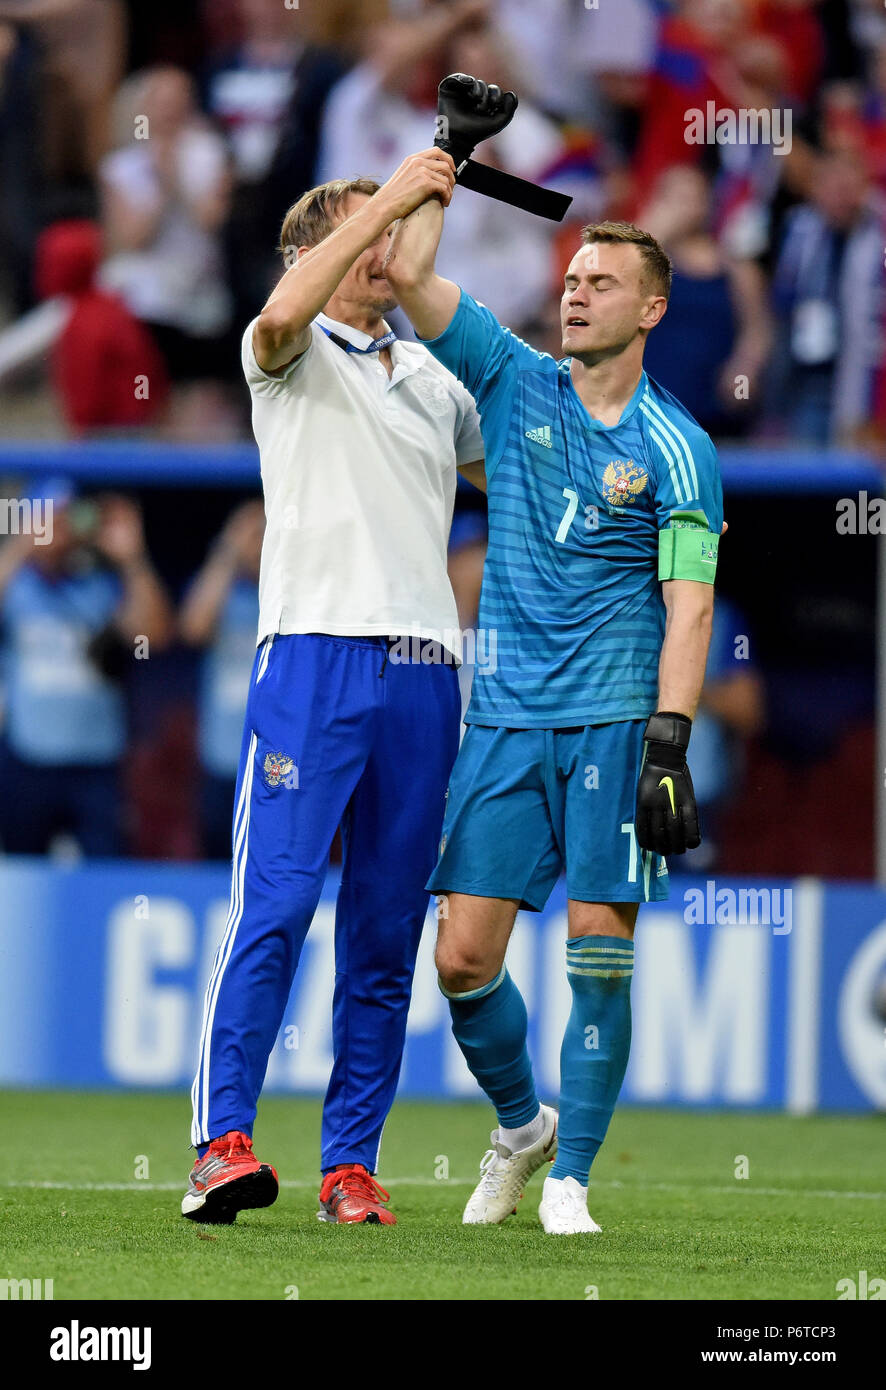 Moscow, Russia - July 1, 2018. Goalkeeper coach Gintaras Stauche goalkeeper Igor Akinfeev after penalty shootout in FIFA World Cup 2018 Round of 16 ma Stock Photo